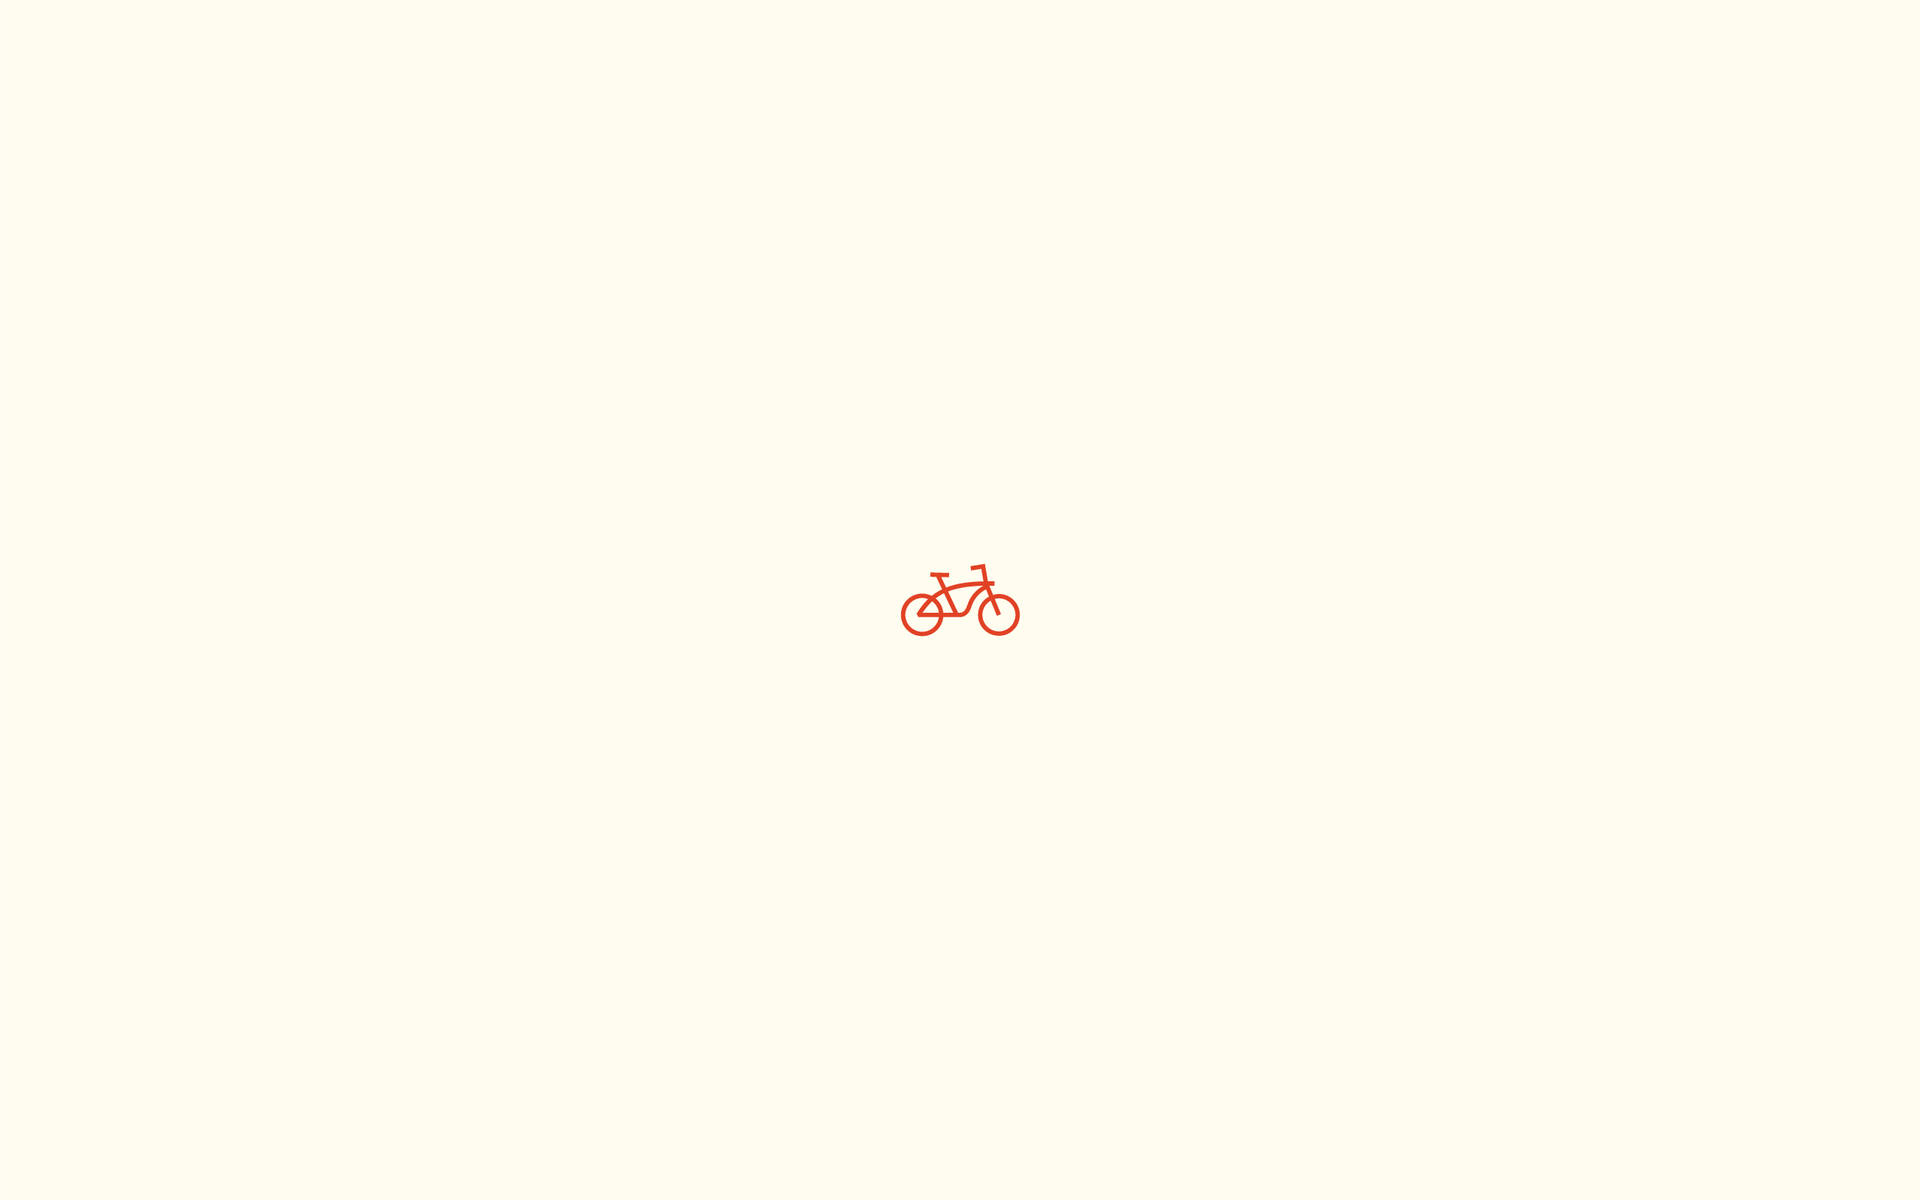 Small Bike In Plain Color Background